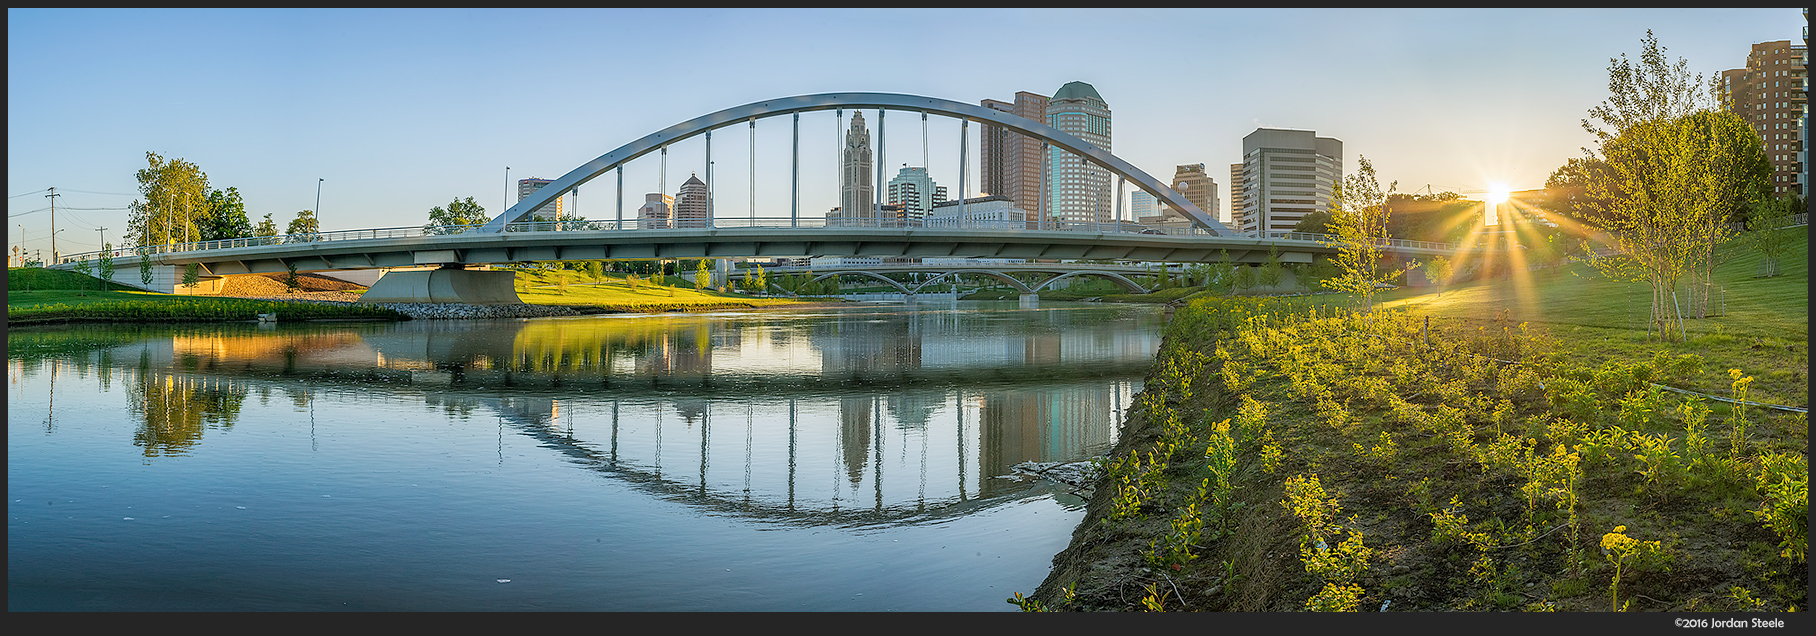 Columbus at Sunrise - Sony A7 II with Sony FE 50mm f/1.8 @ f/11 (stitch of 5 two-shot HDR images)